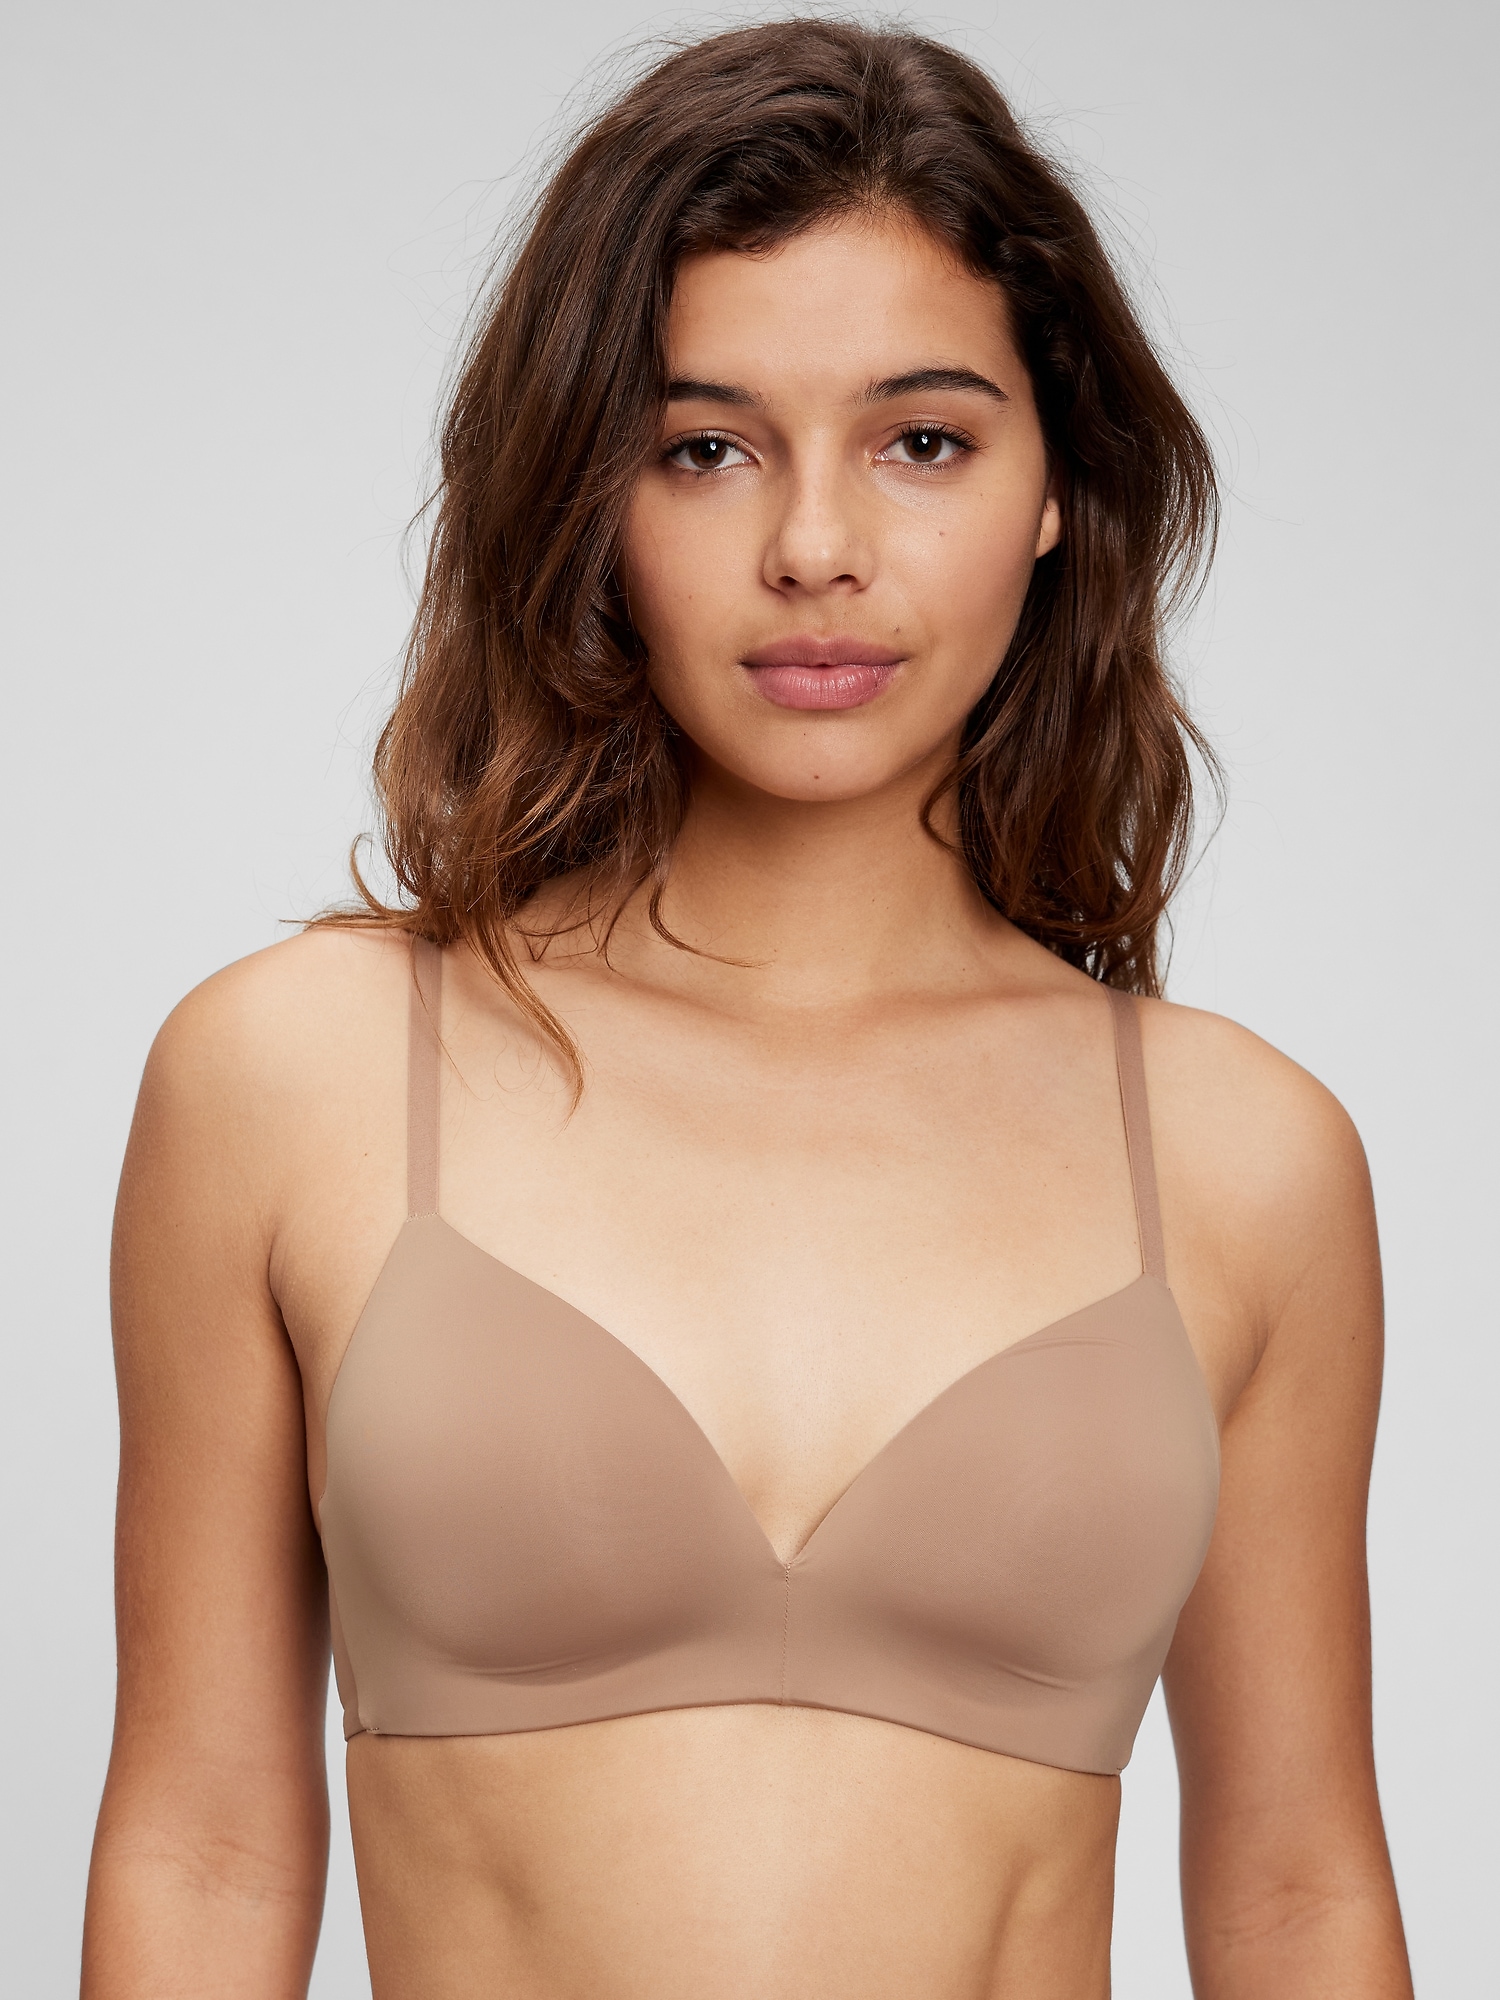 Full Coverage Padded Non-Wired T-shirt Bra(PACK OF 2) – SOIE Woman